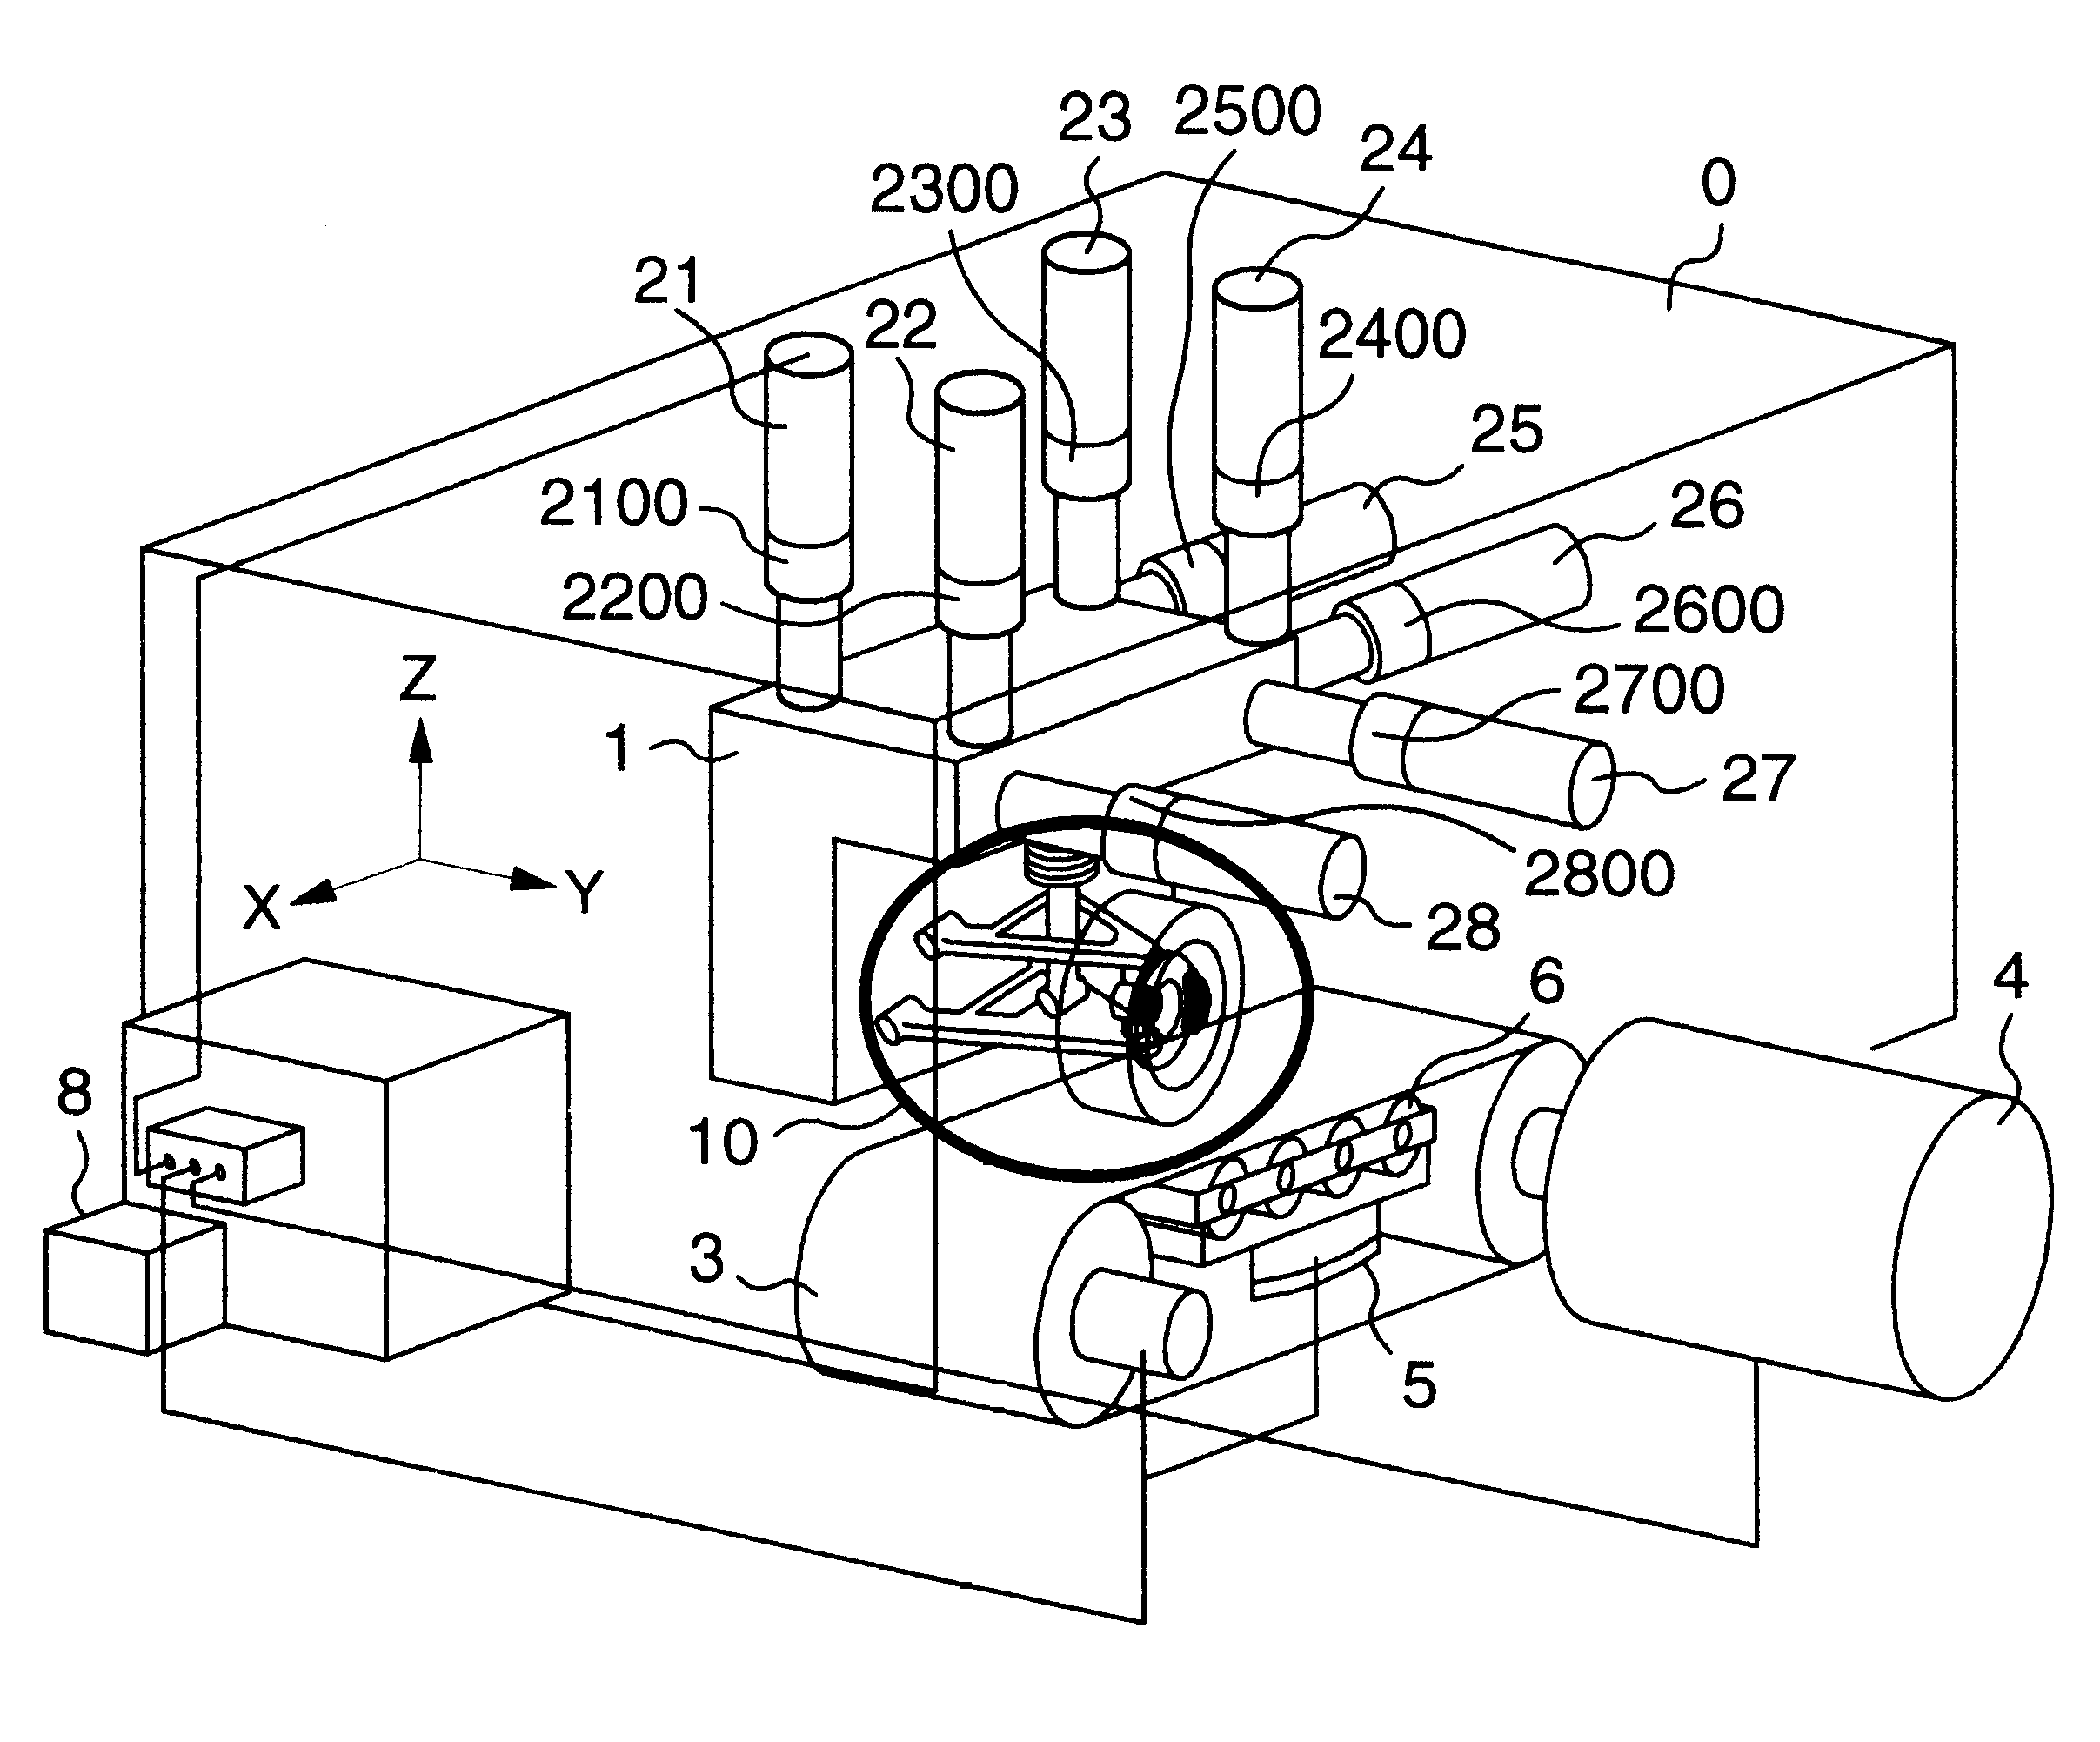 Apparatus for and method of testing dynamic characteristics of components of vehicle